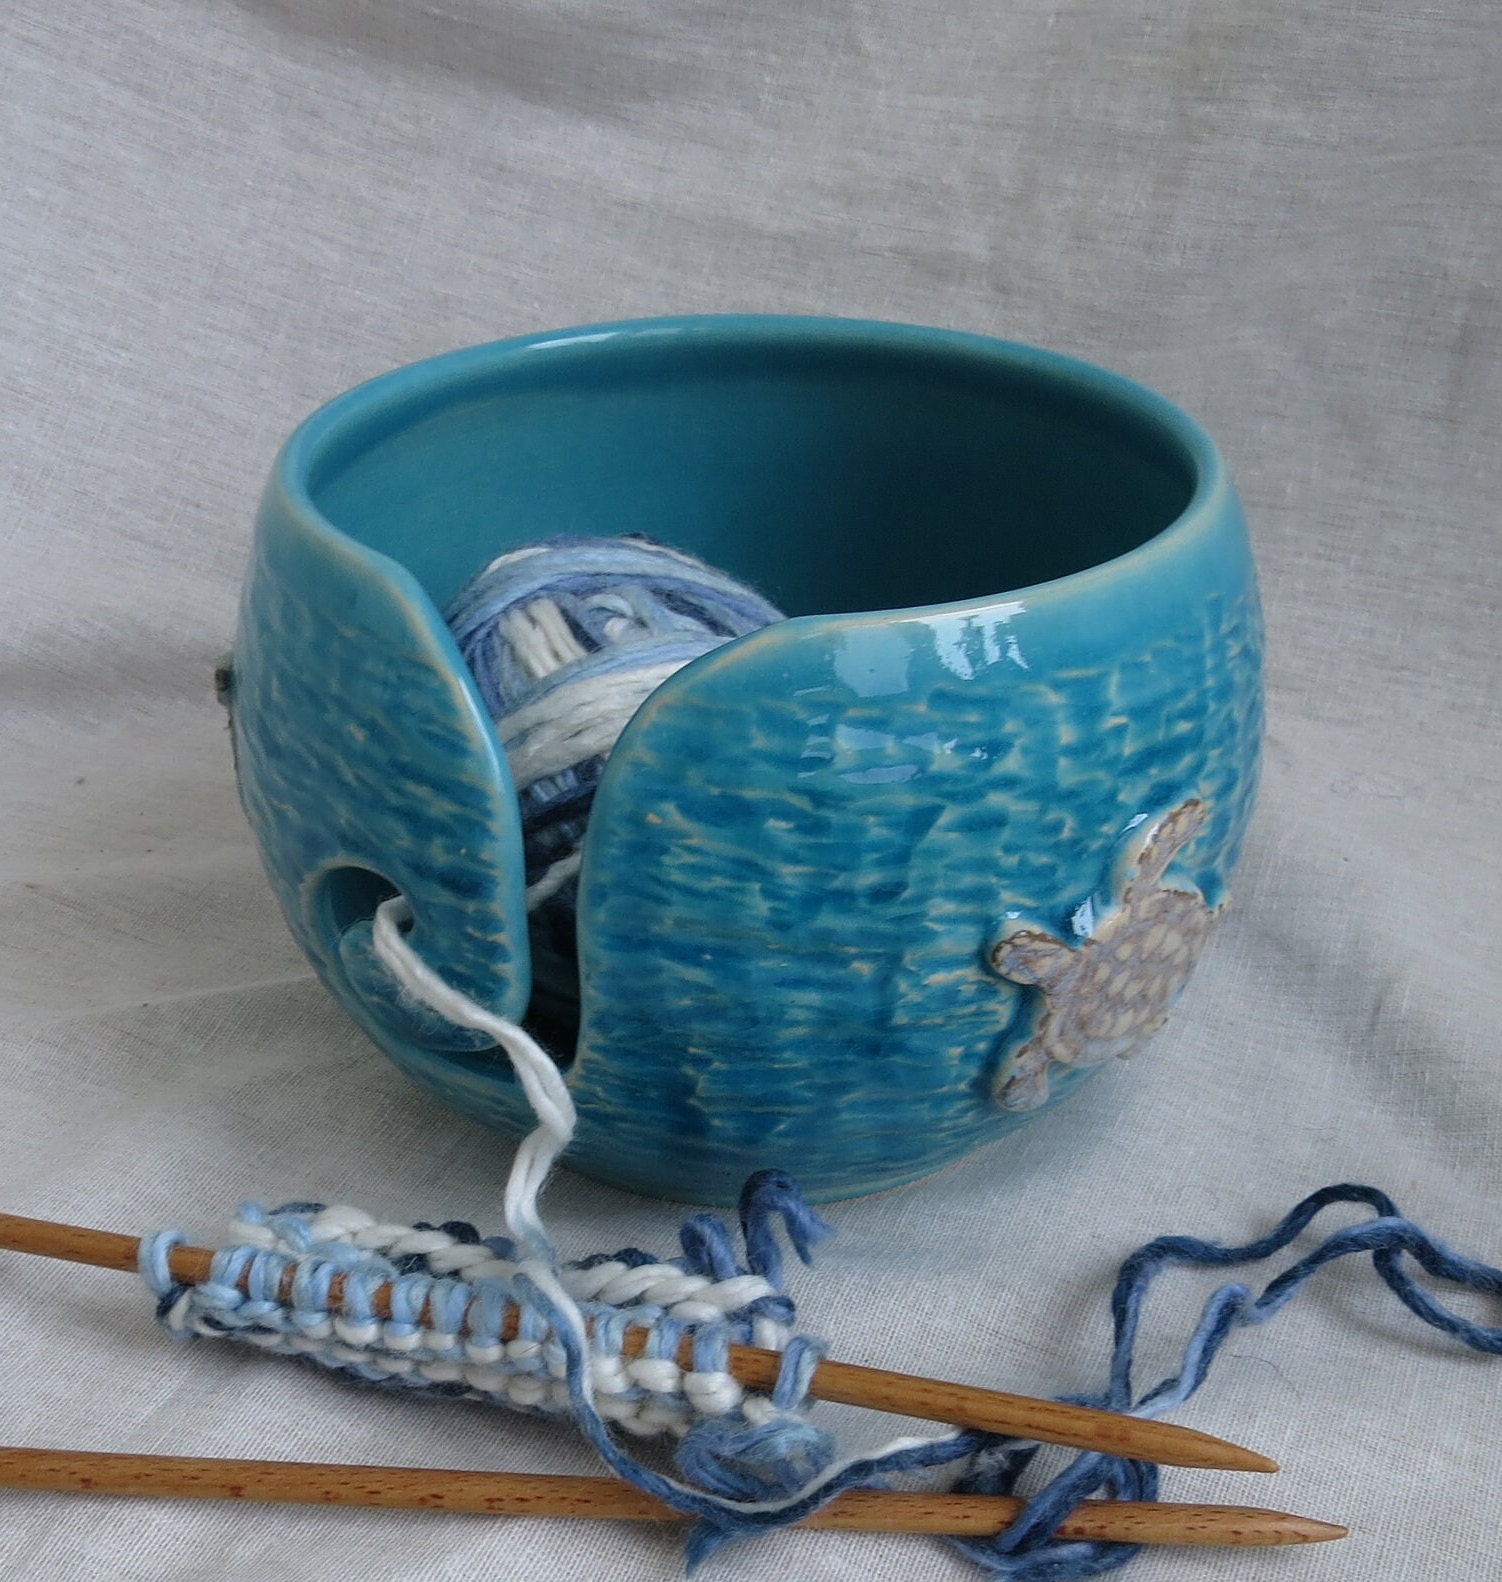 Large Yarn Bowl for Crochet and Knitting Fits Whole Skein - Craft